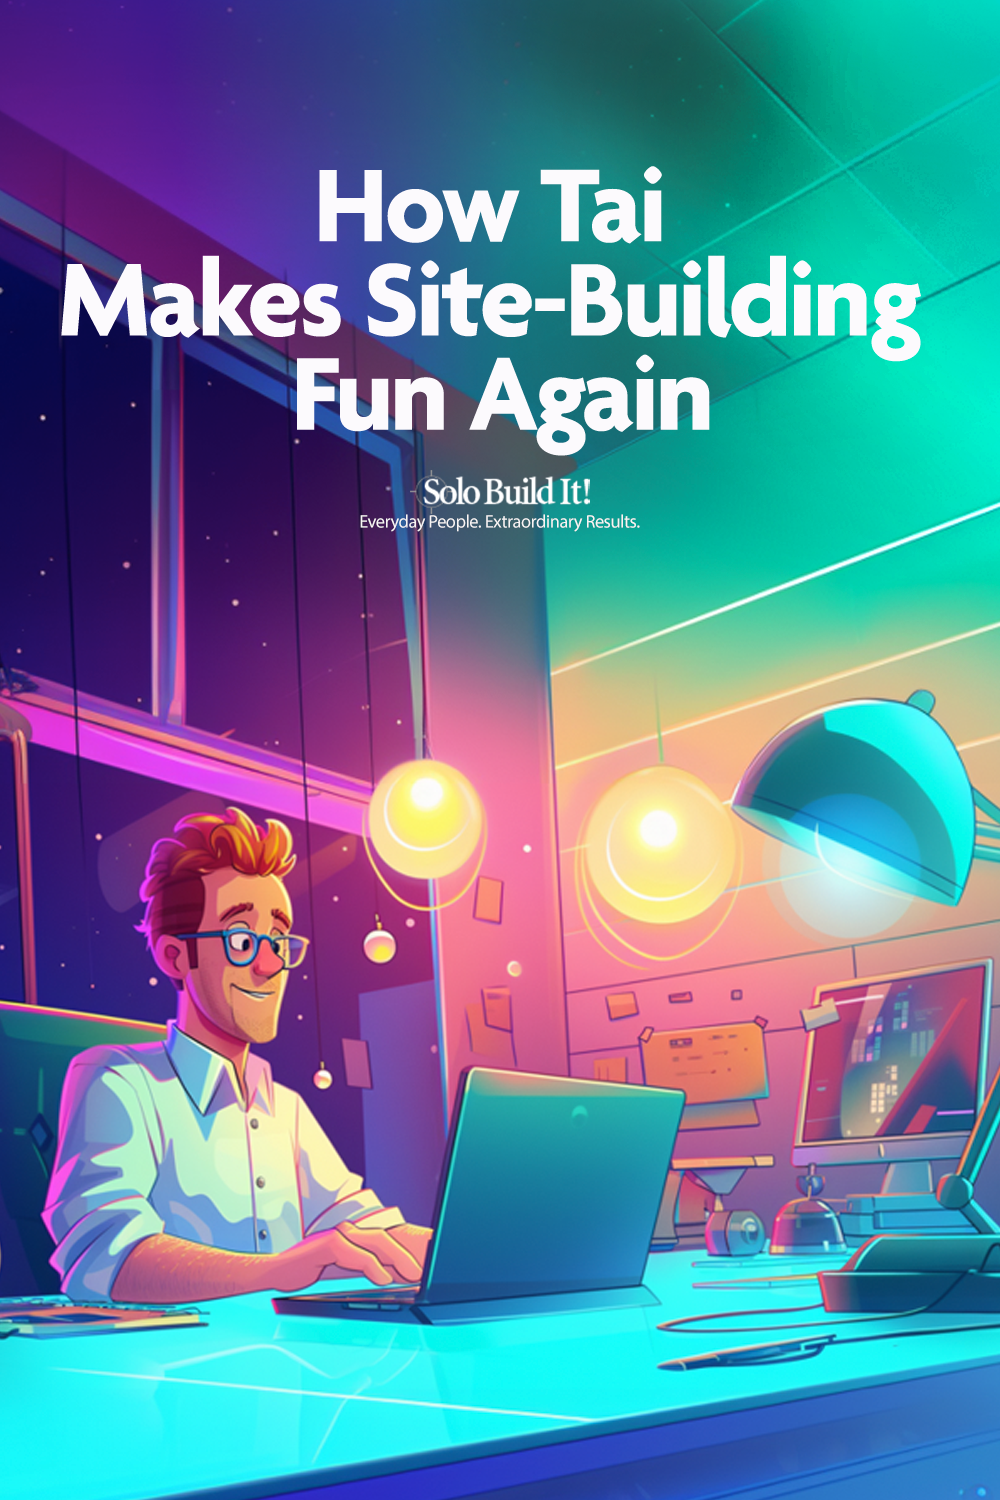 An AI Tool to Create Website Content: How Tai Makes Site-Building Fun Again